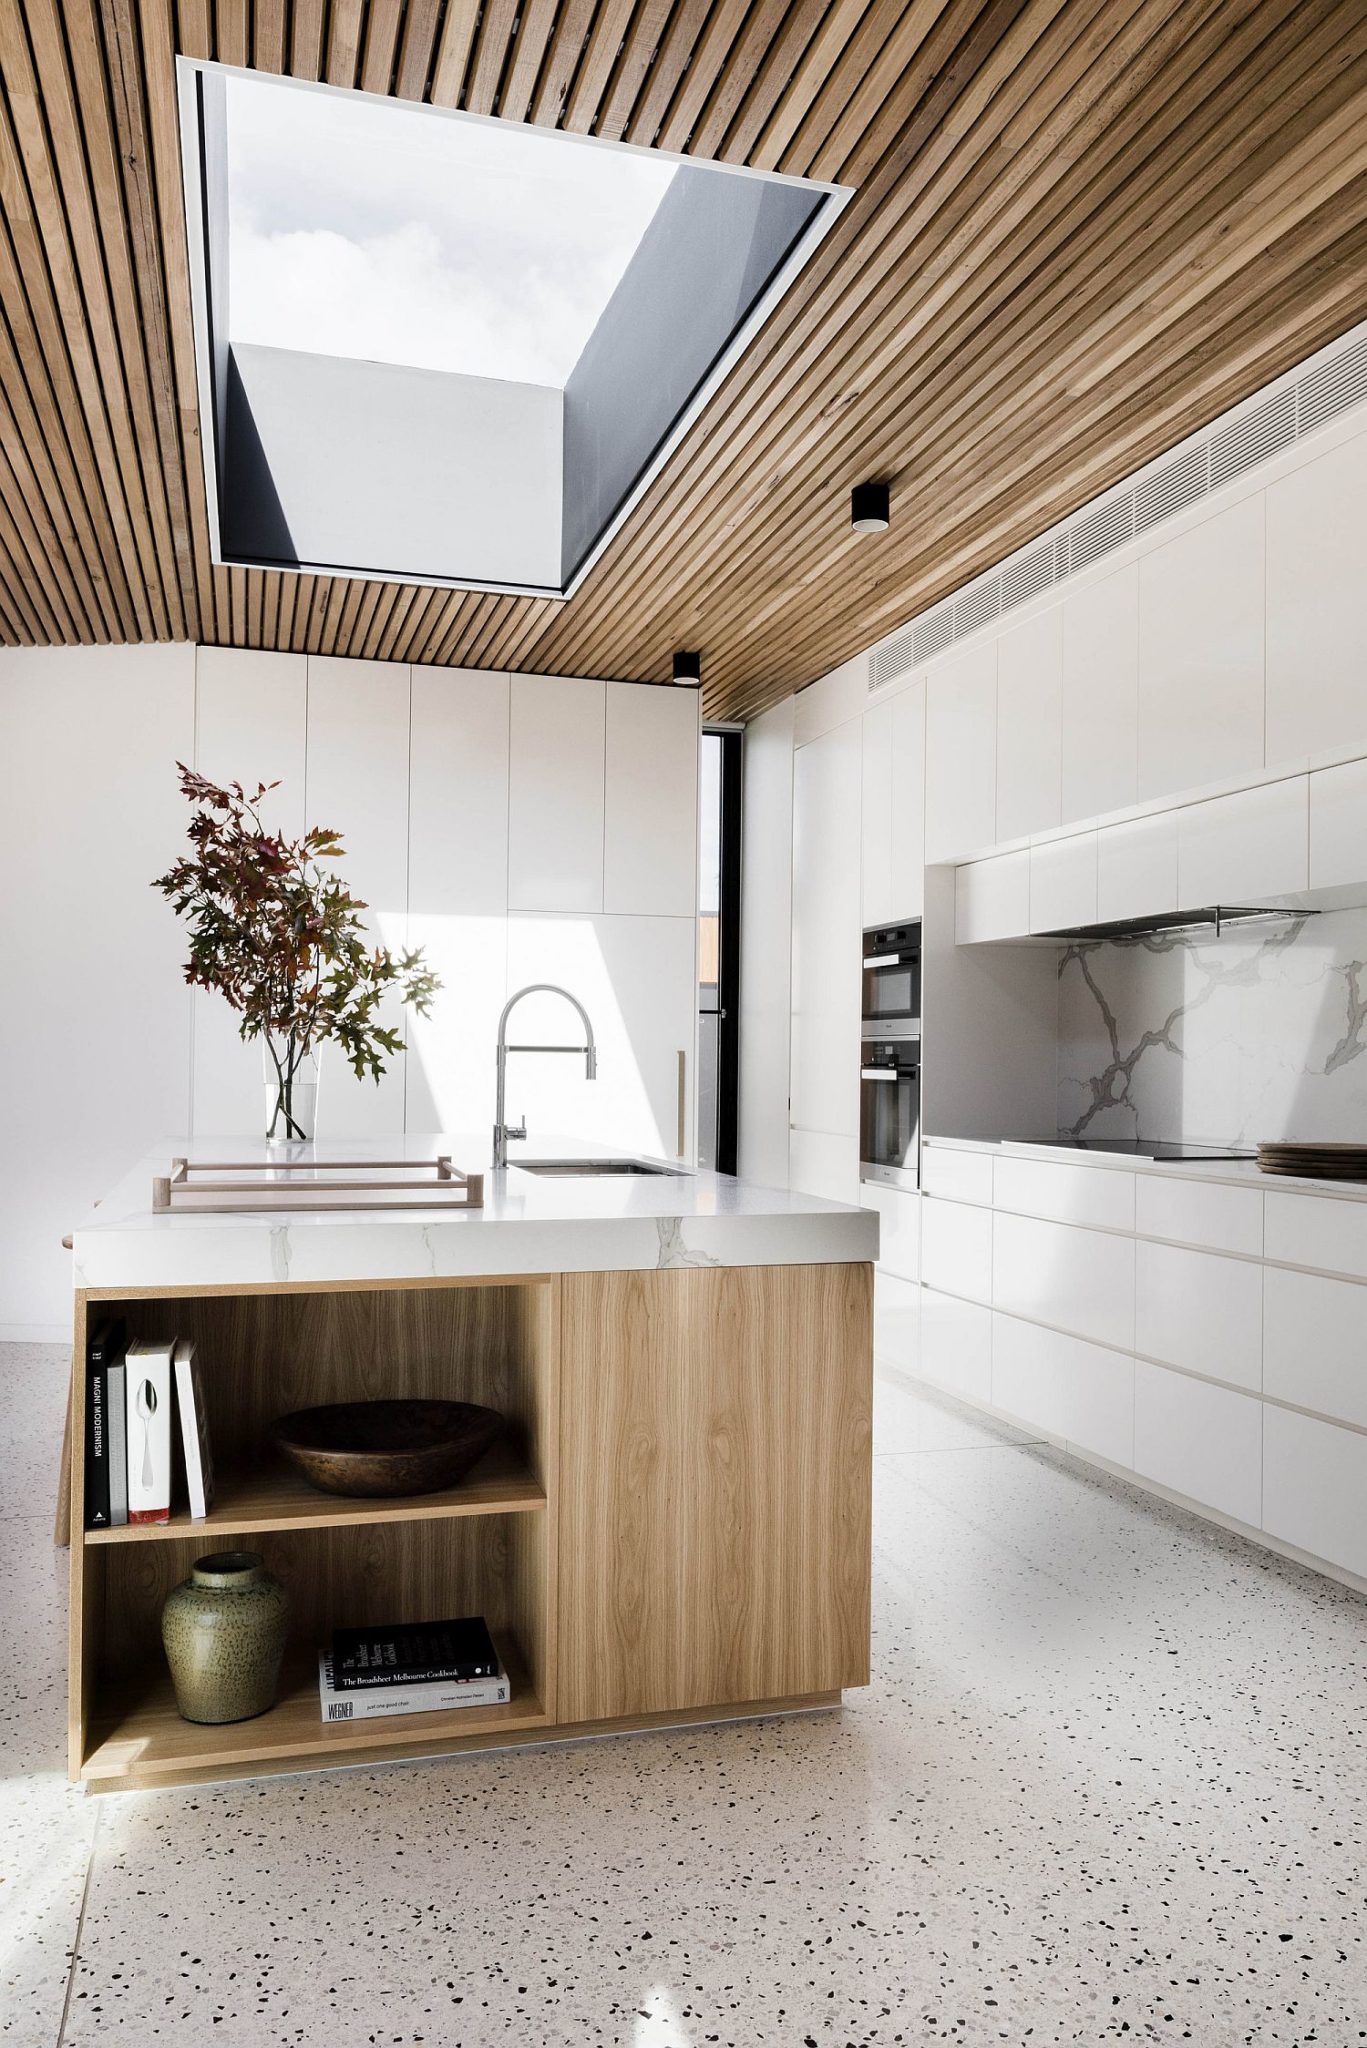 Skylight-brings-natural-ventilation-to-the-kitchen-with-wooden-ceiling